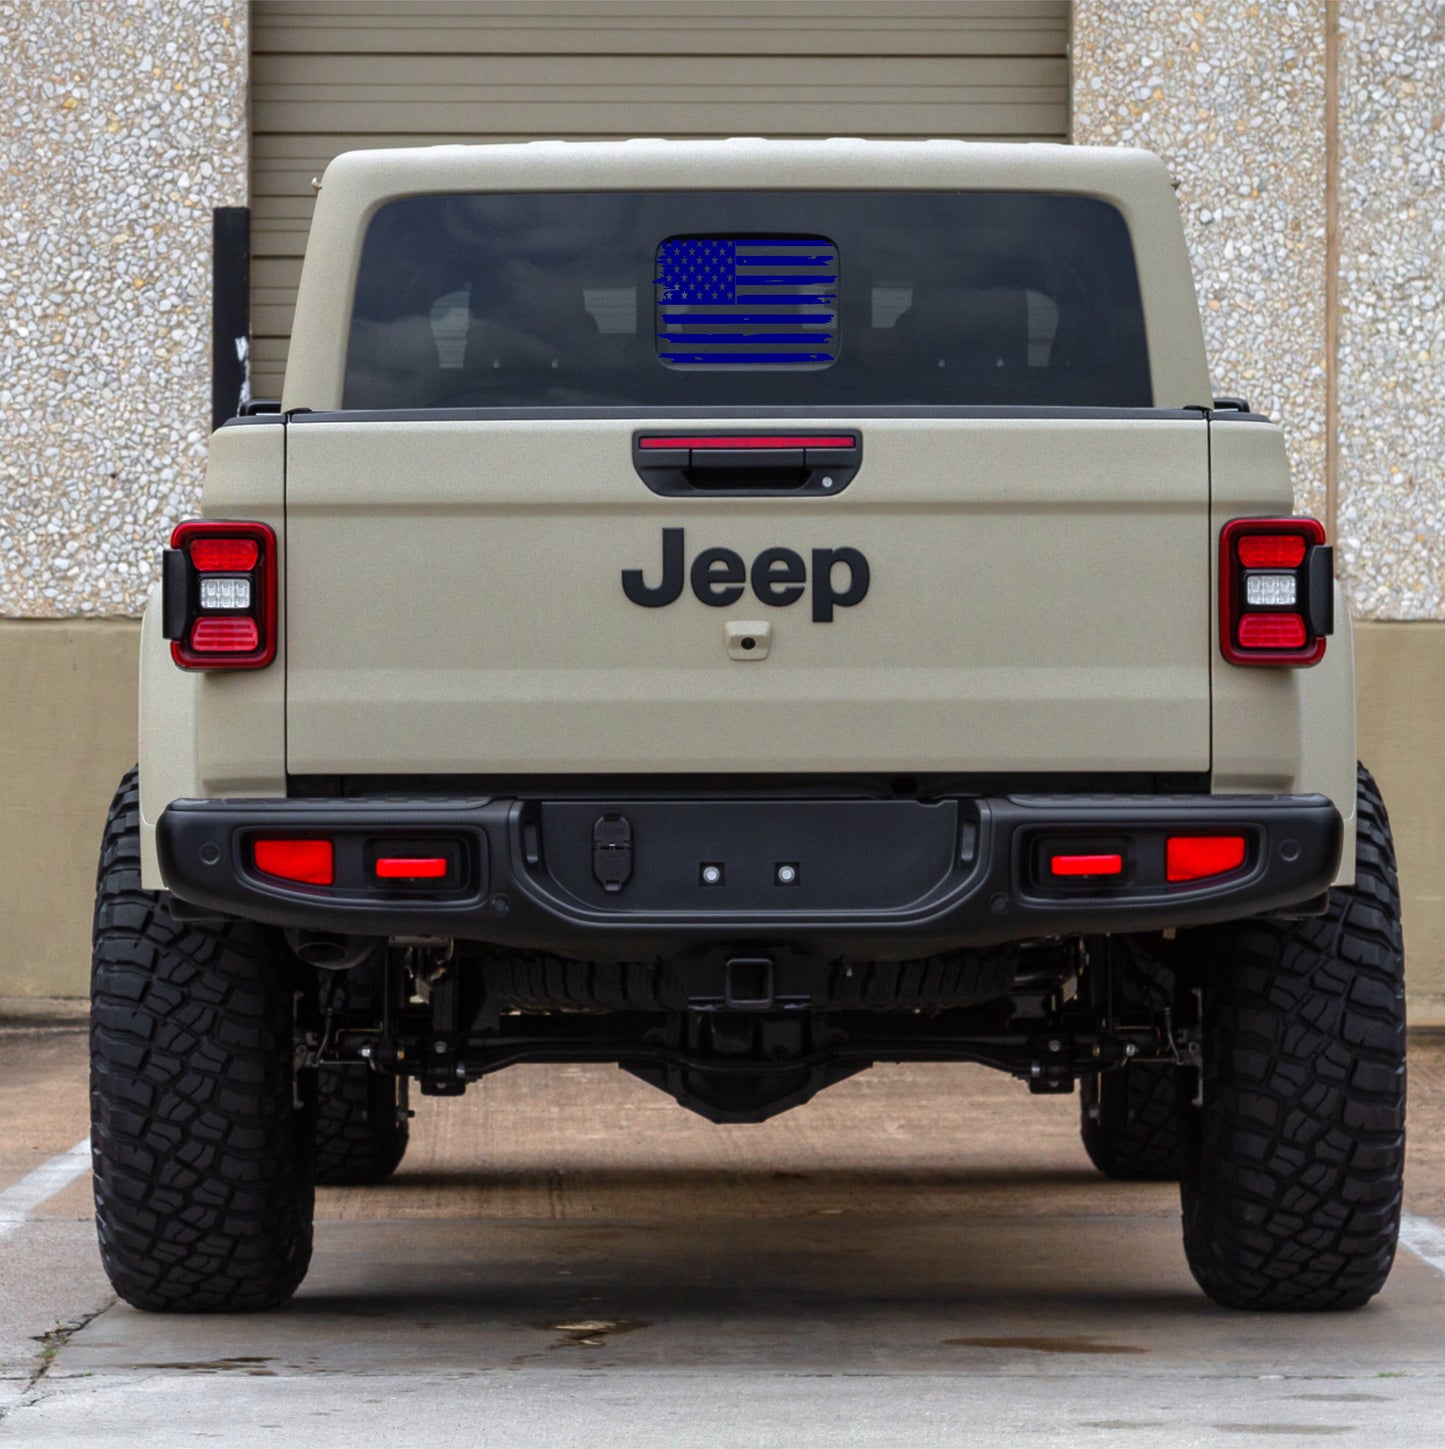  Jeep Gladiator Small Back Rear Window Decal Stickers Distressed American Flag Vinyl Decal